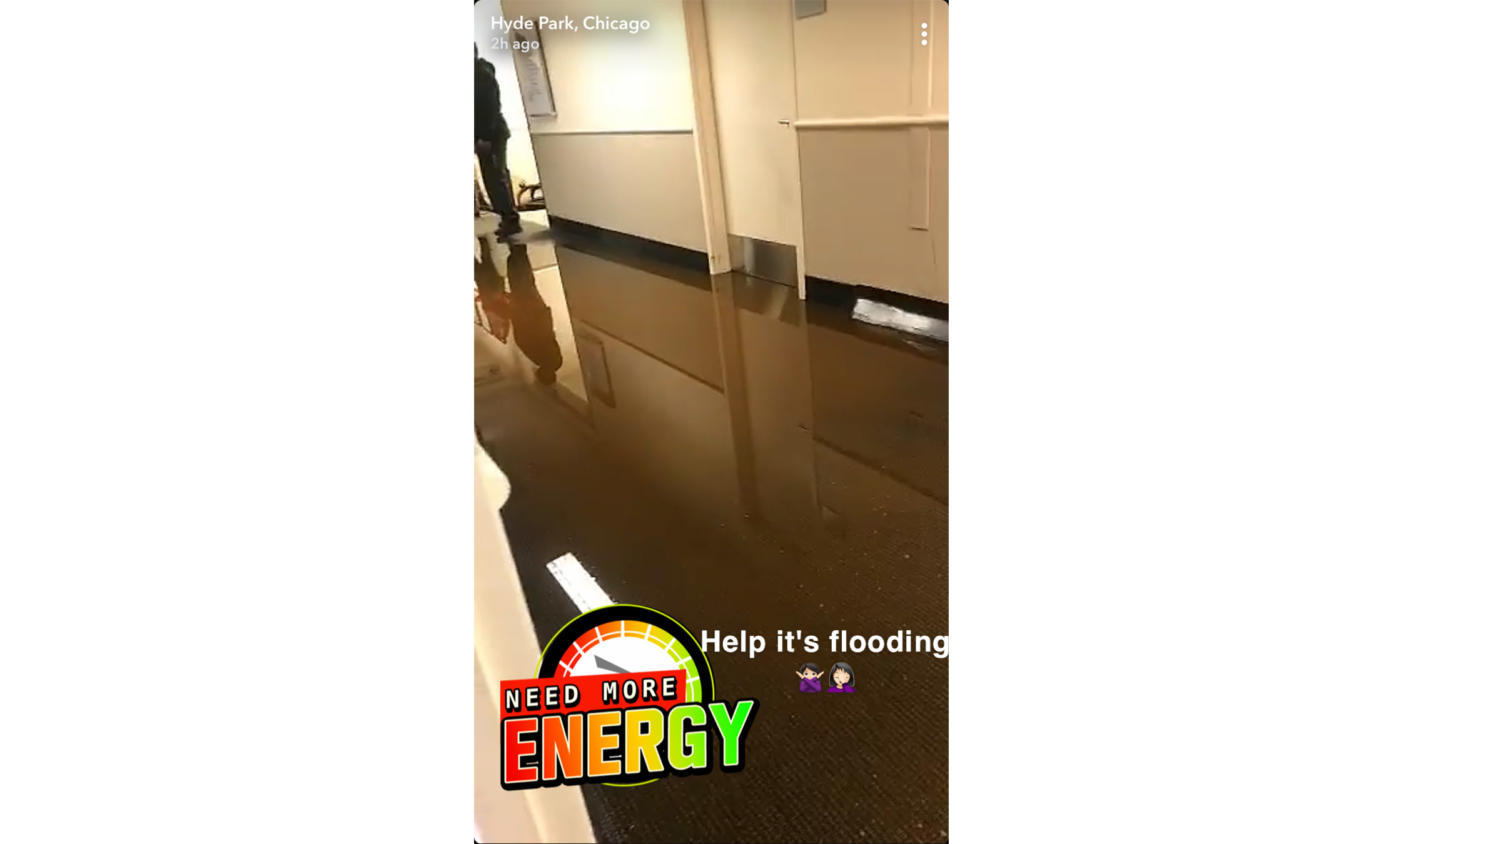 A video of flooding at the Billings Hospital building was posted to Snapchat.